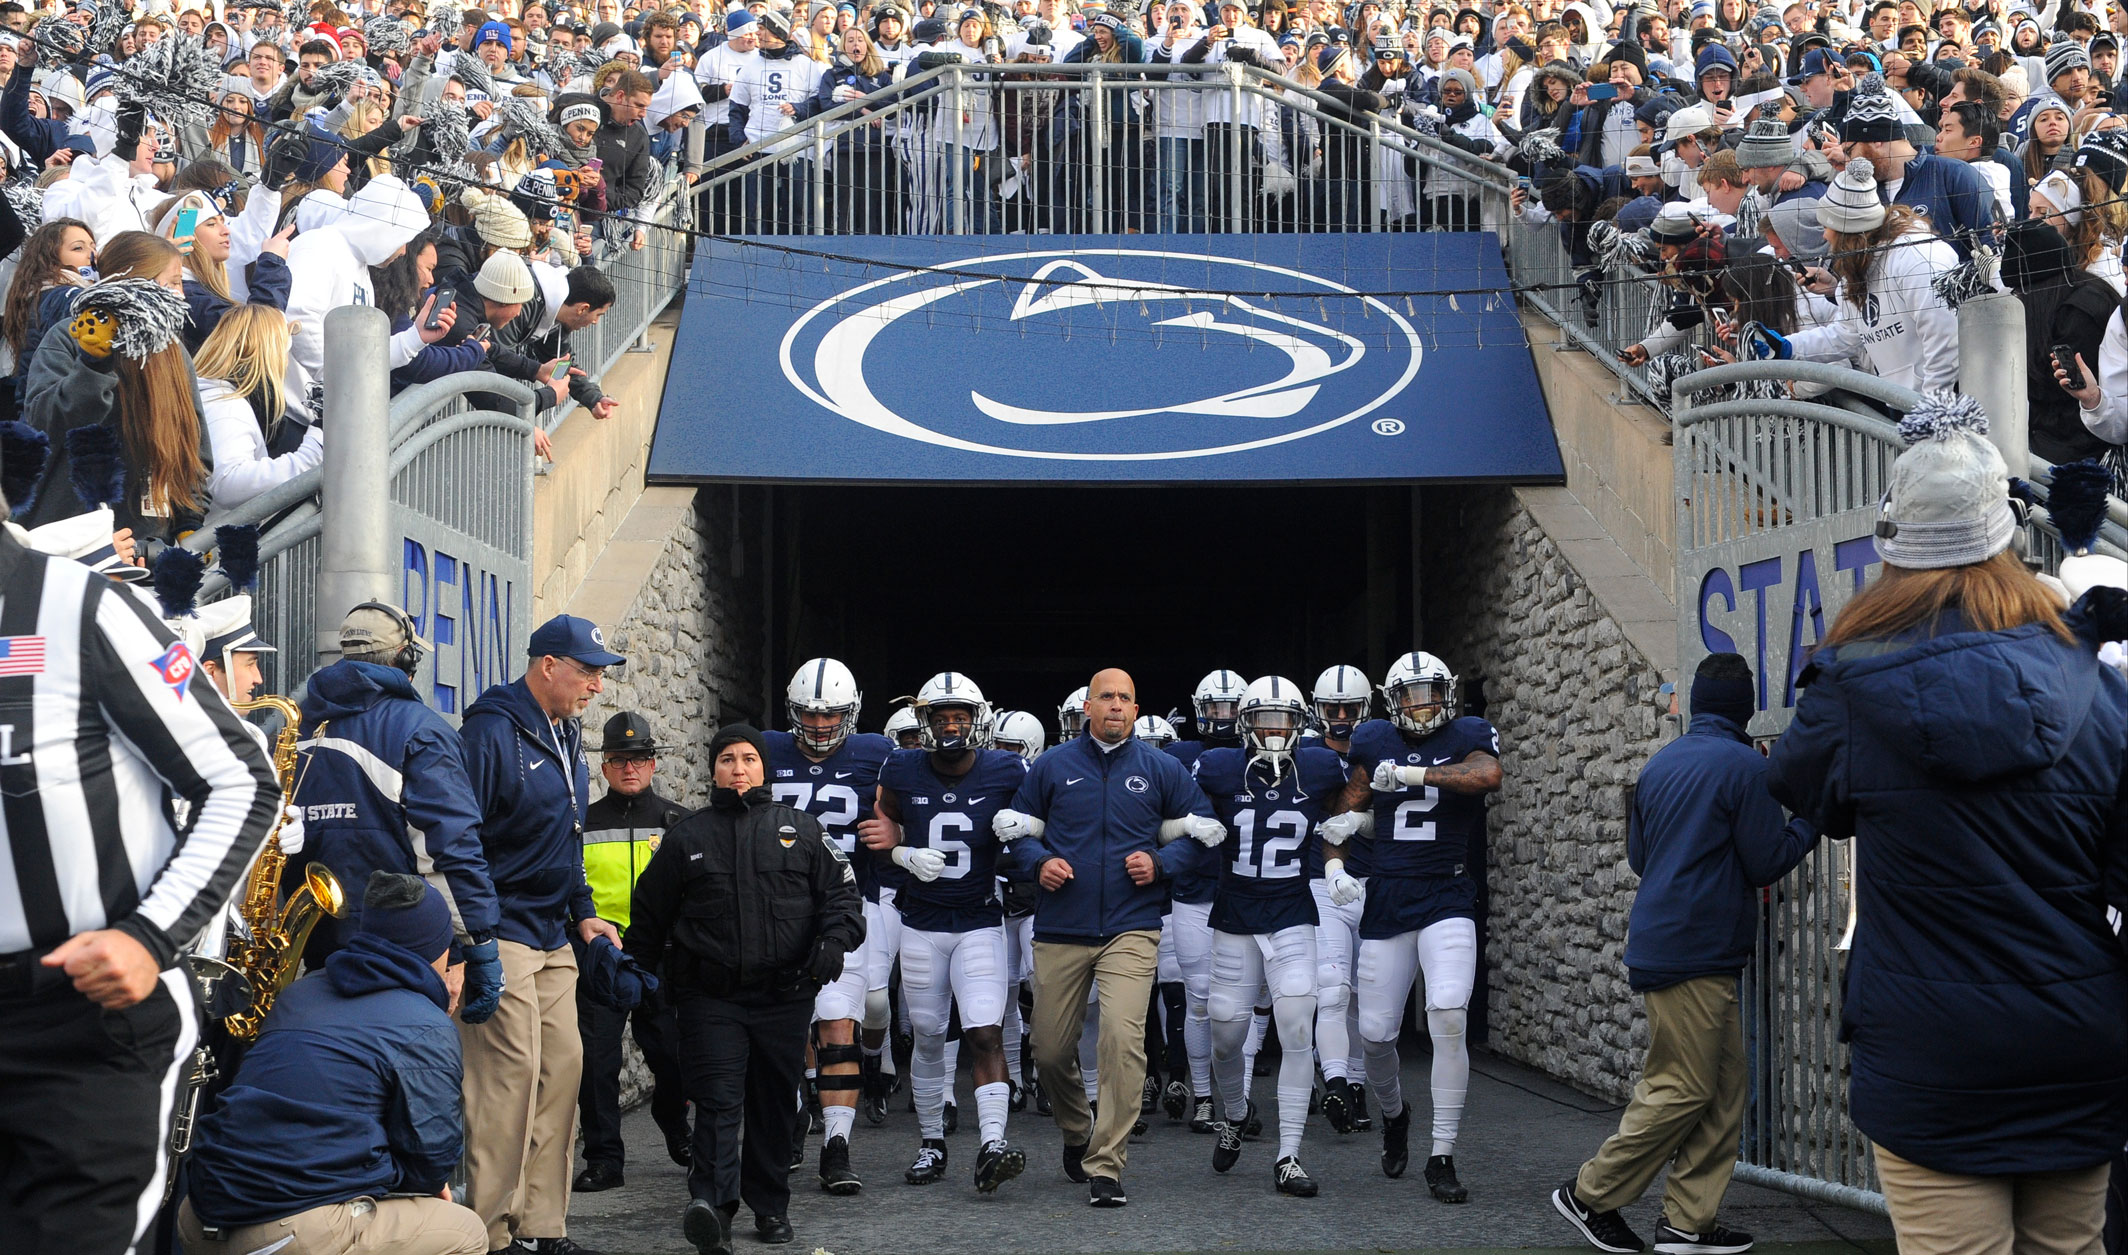 James Franklin linking arms with players as they emerge from the Beaver Stadium tunnel, photo by Randy Litzinger / AP News